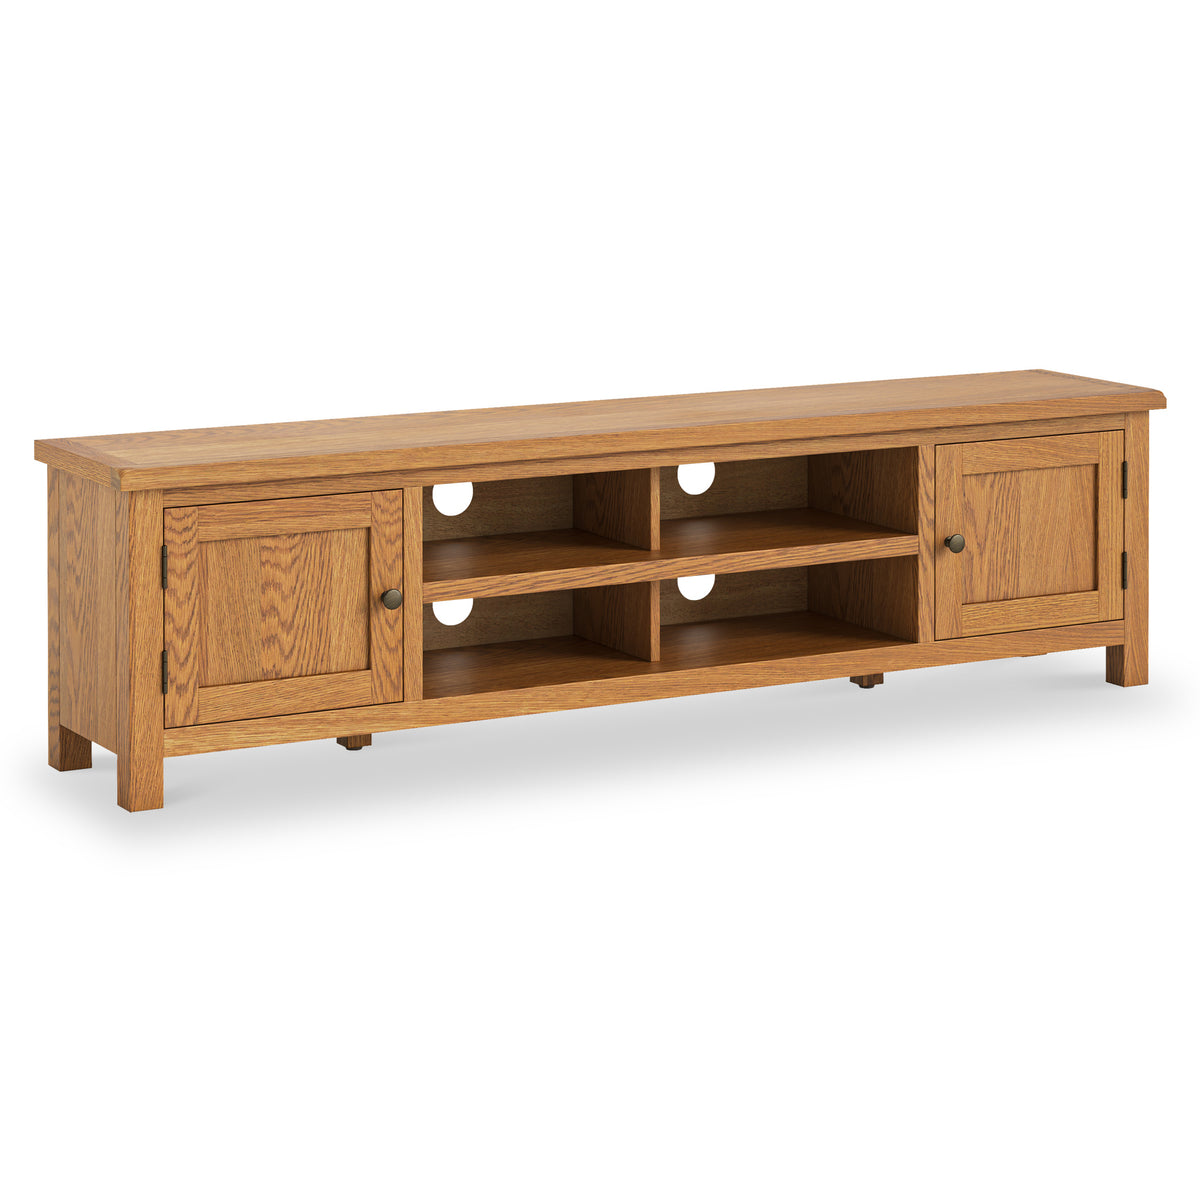 Surrey Oak 180cm Extra Wide TV Stand from Roseland Furniture